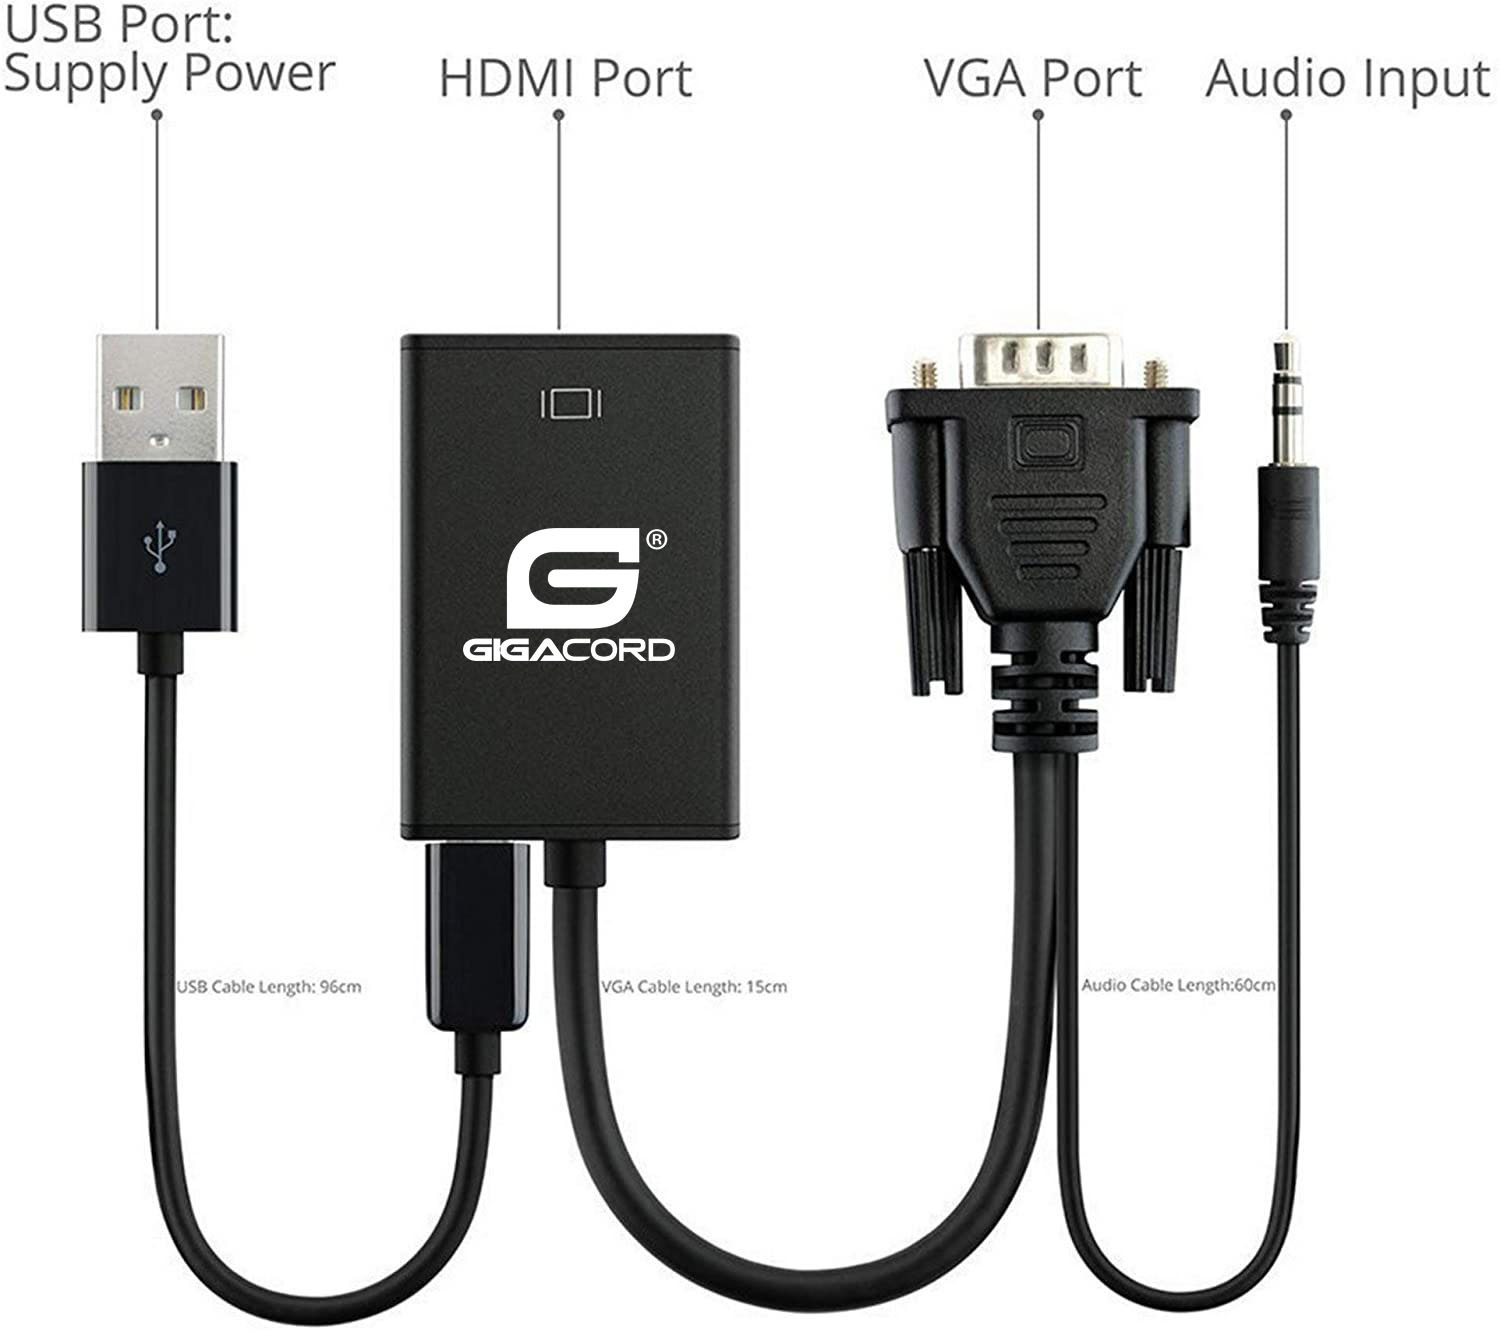 Gigacord 10" VGA Male to HDMI Converter Adapter with 3.5mm USB Power Adapter, Black - NWCA Inc.